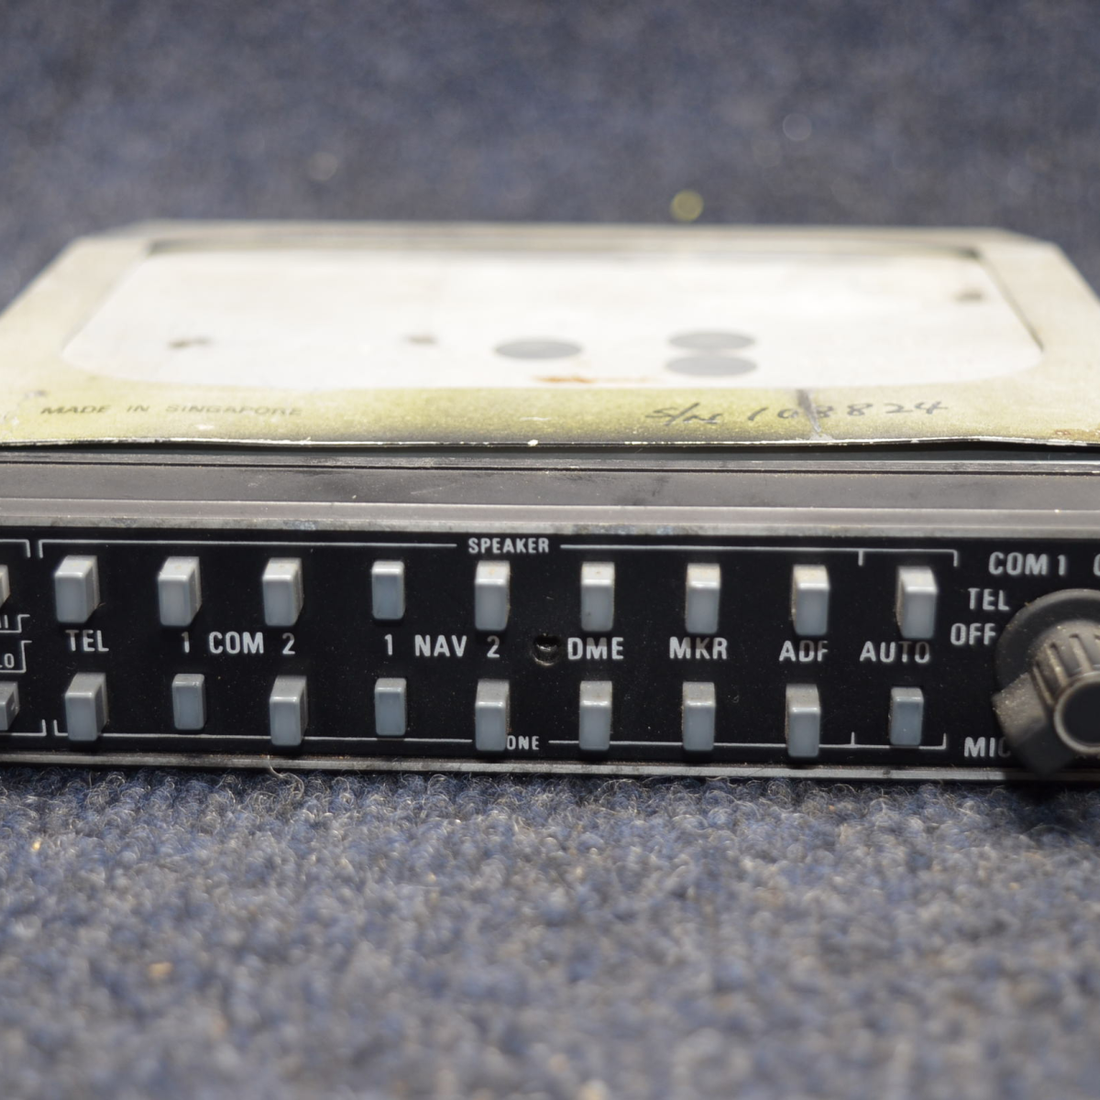 Used aircraft parts for sale, 066-1055-03 Cessna C175 KMA 24 BENDIX KING AUDIO PANEL W/ RACK AND CONNECTOR